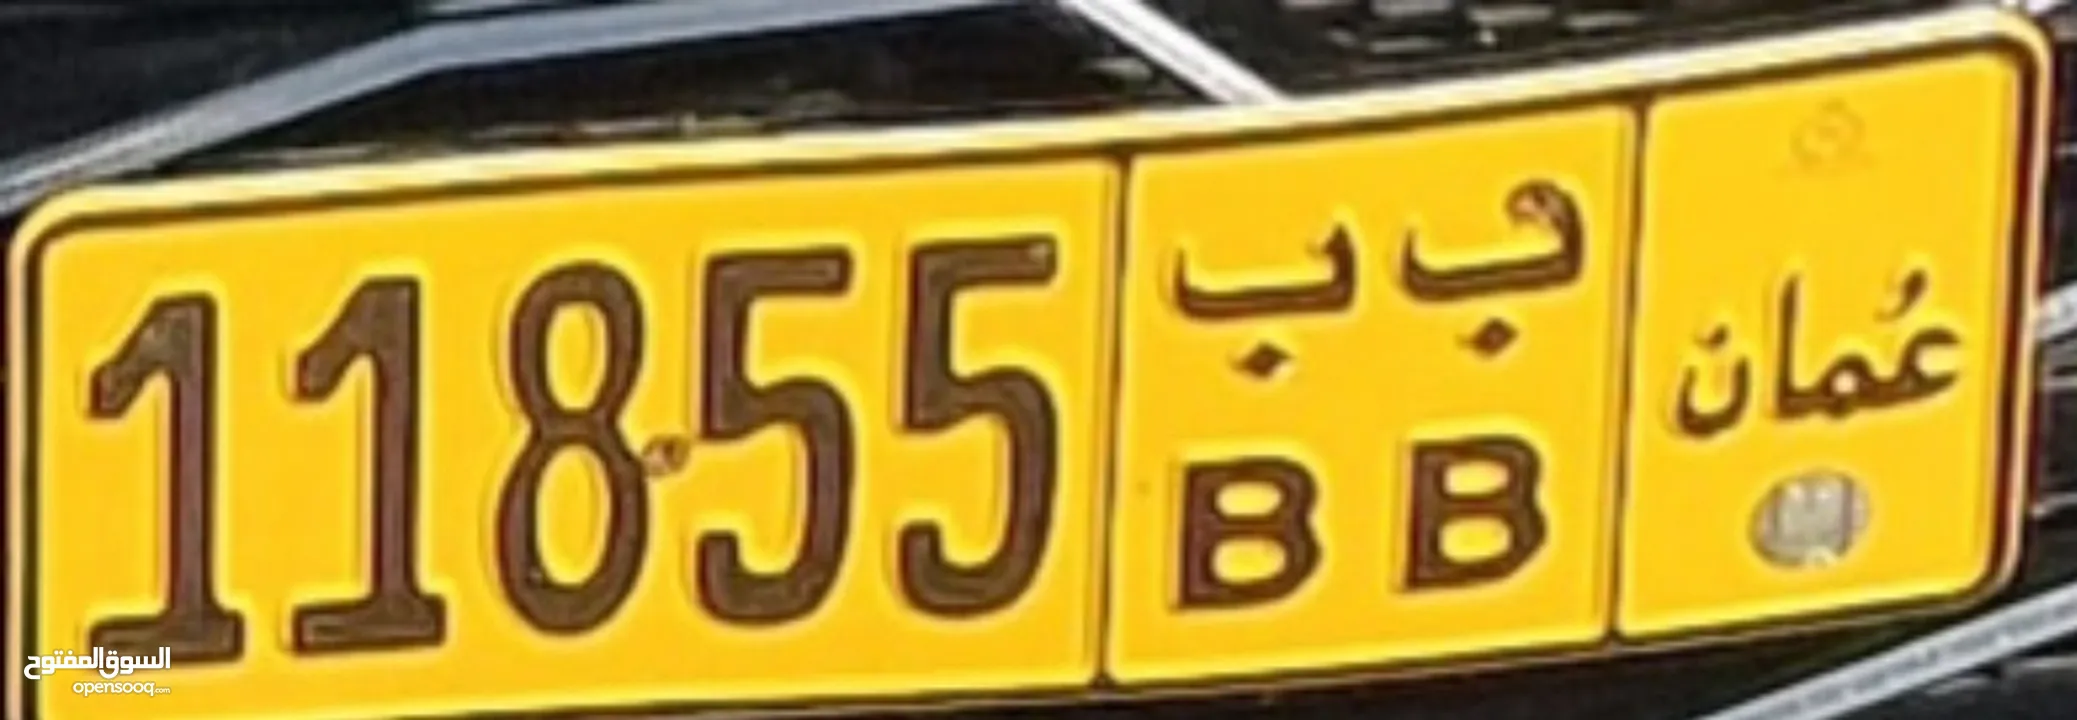 Car plate for sale